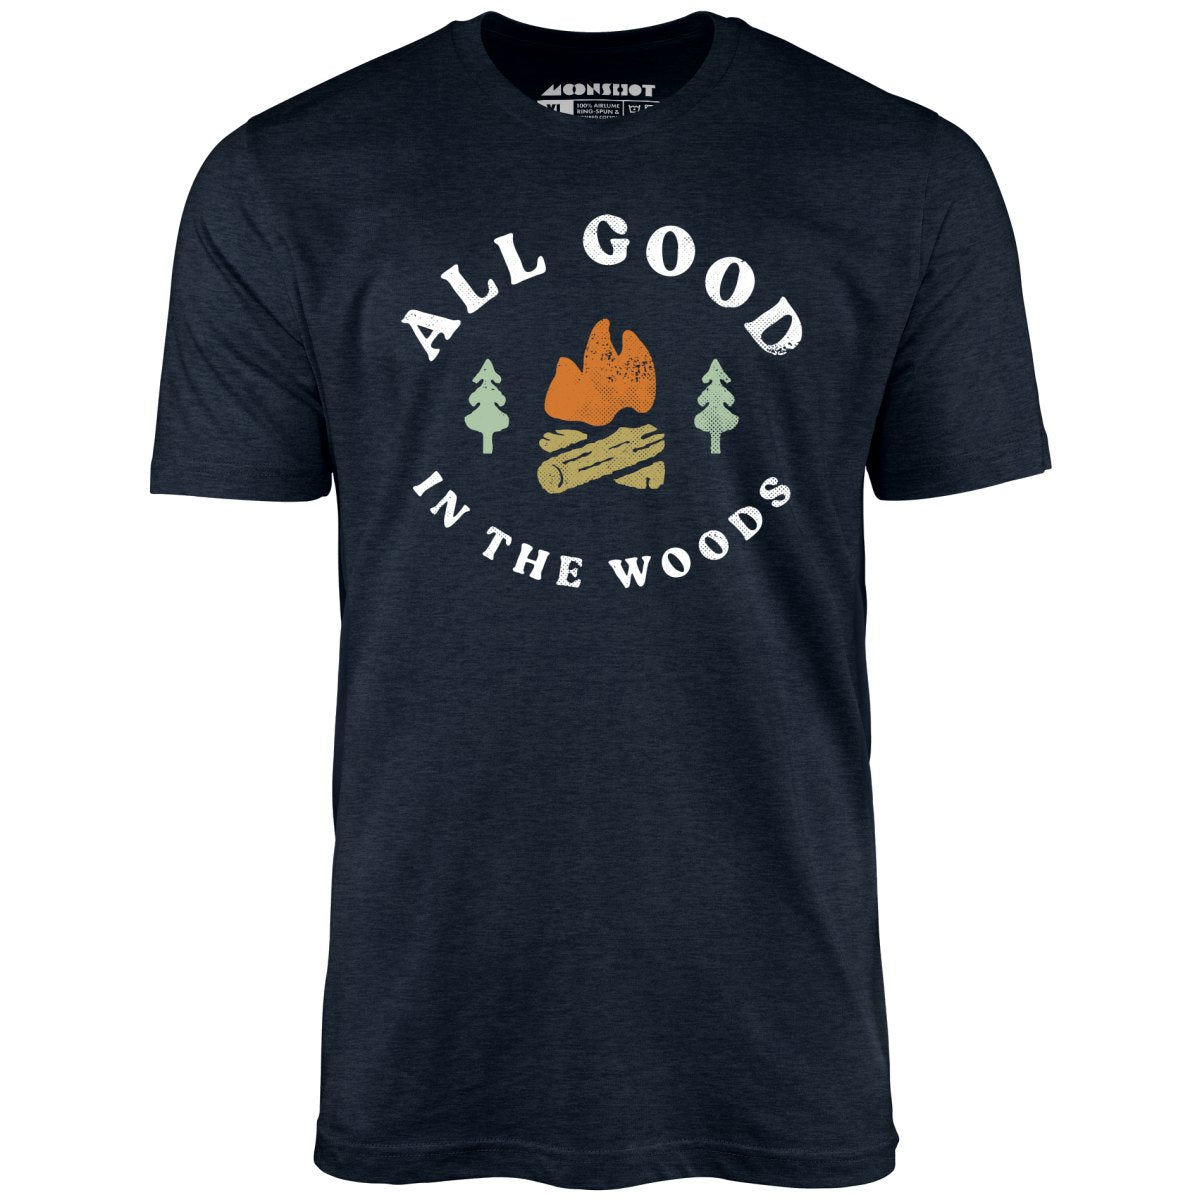 All Good In The Woods - Unisex T-Shirt